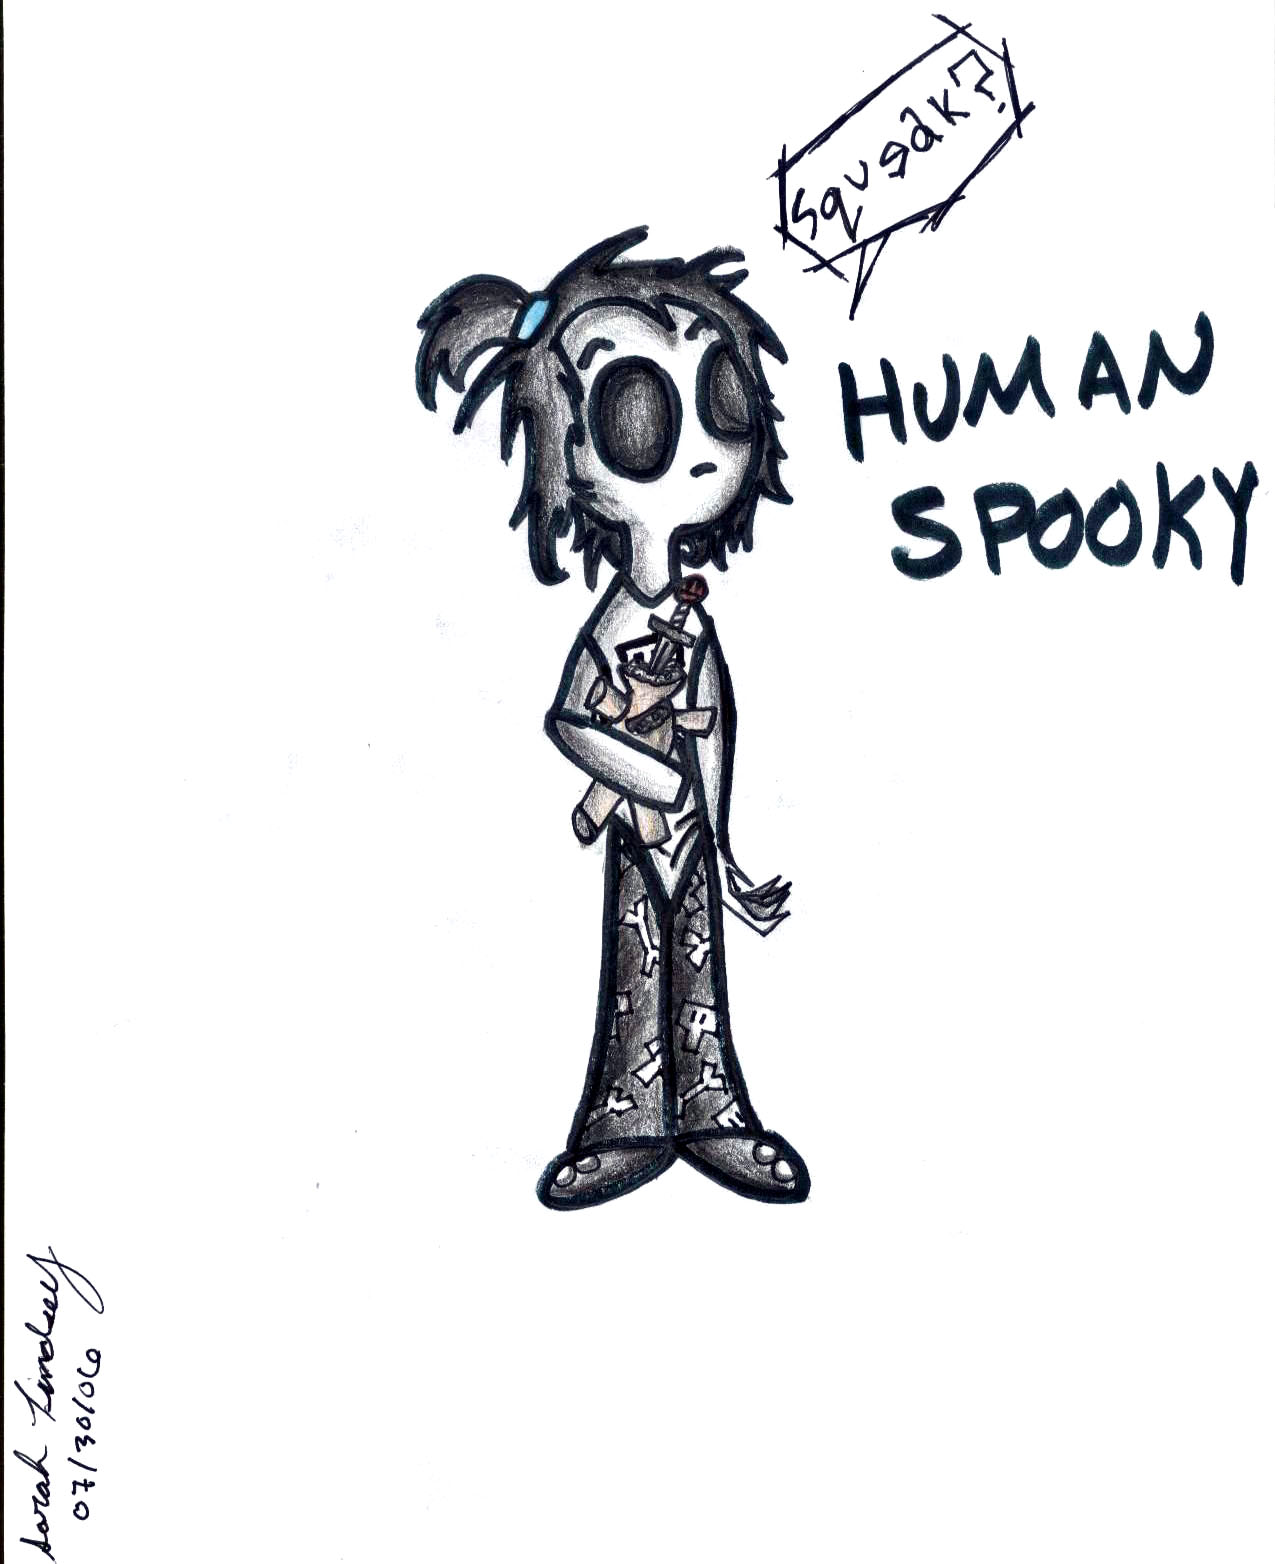 Human Spooky by MangaGoth